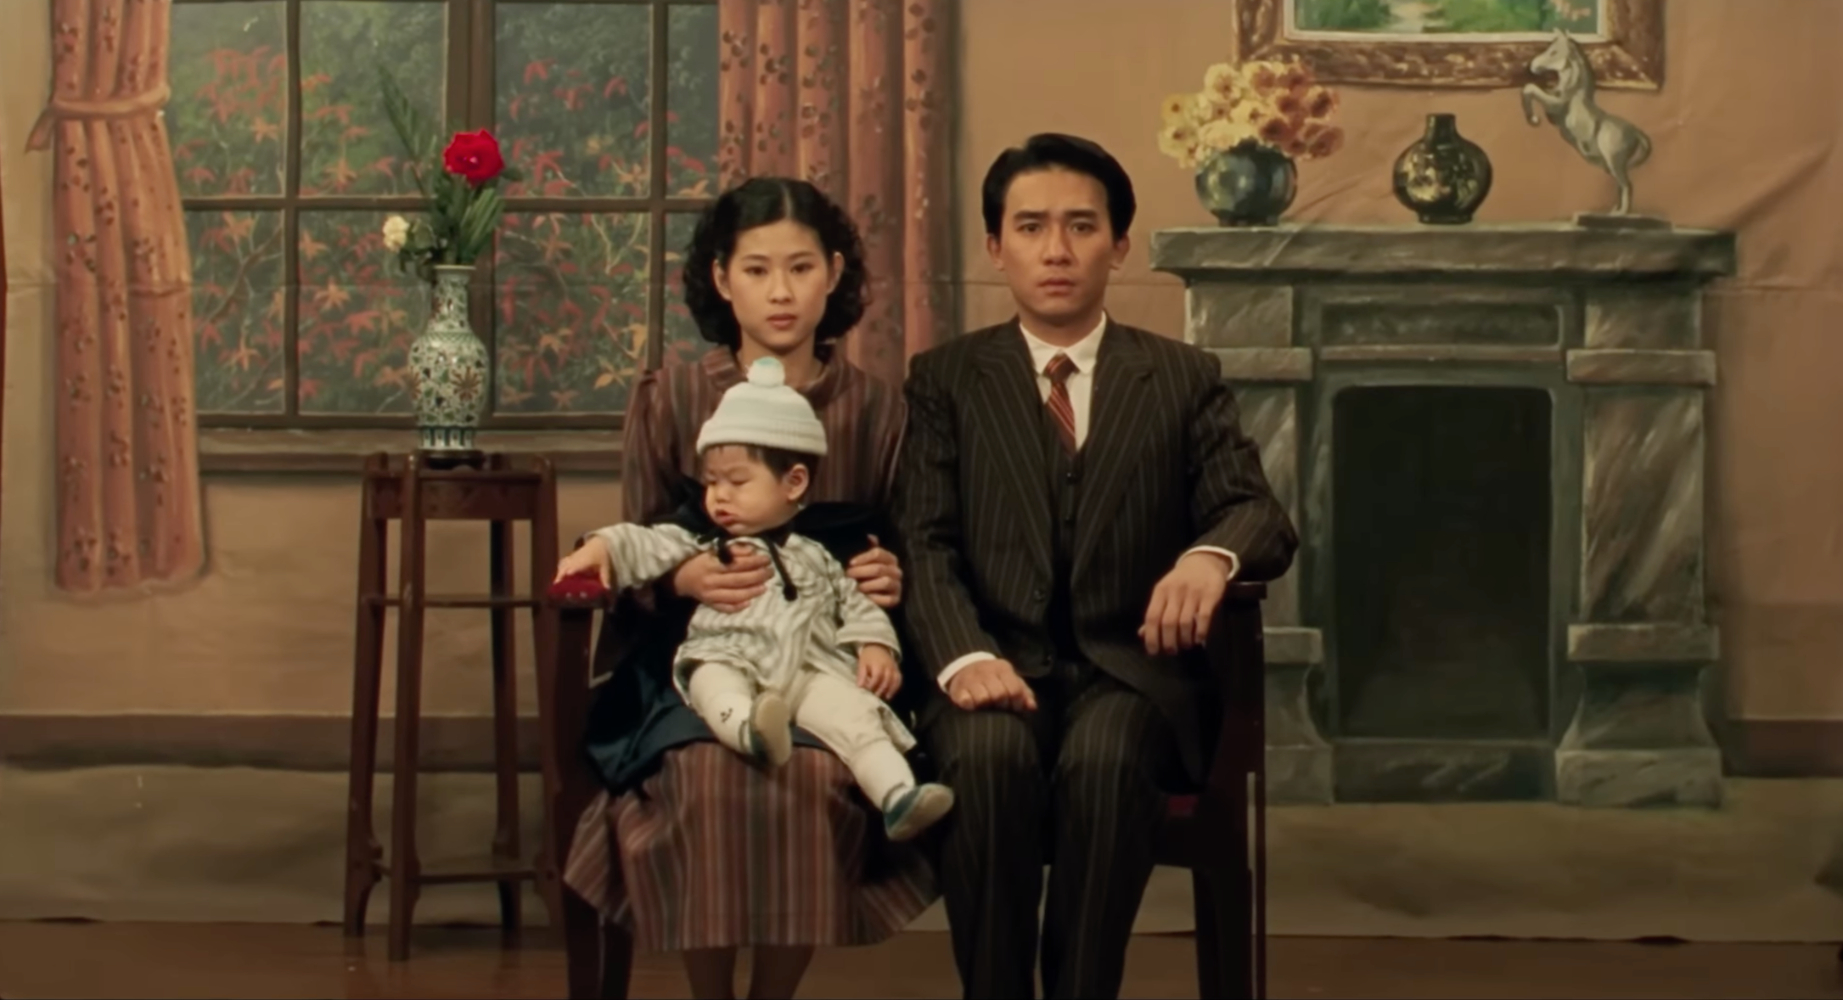 Hou Hsiao-hsien’s Epic Is Revived In Trailer for A City of Sadness ...